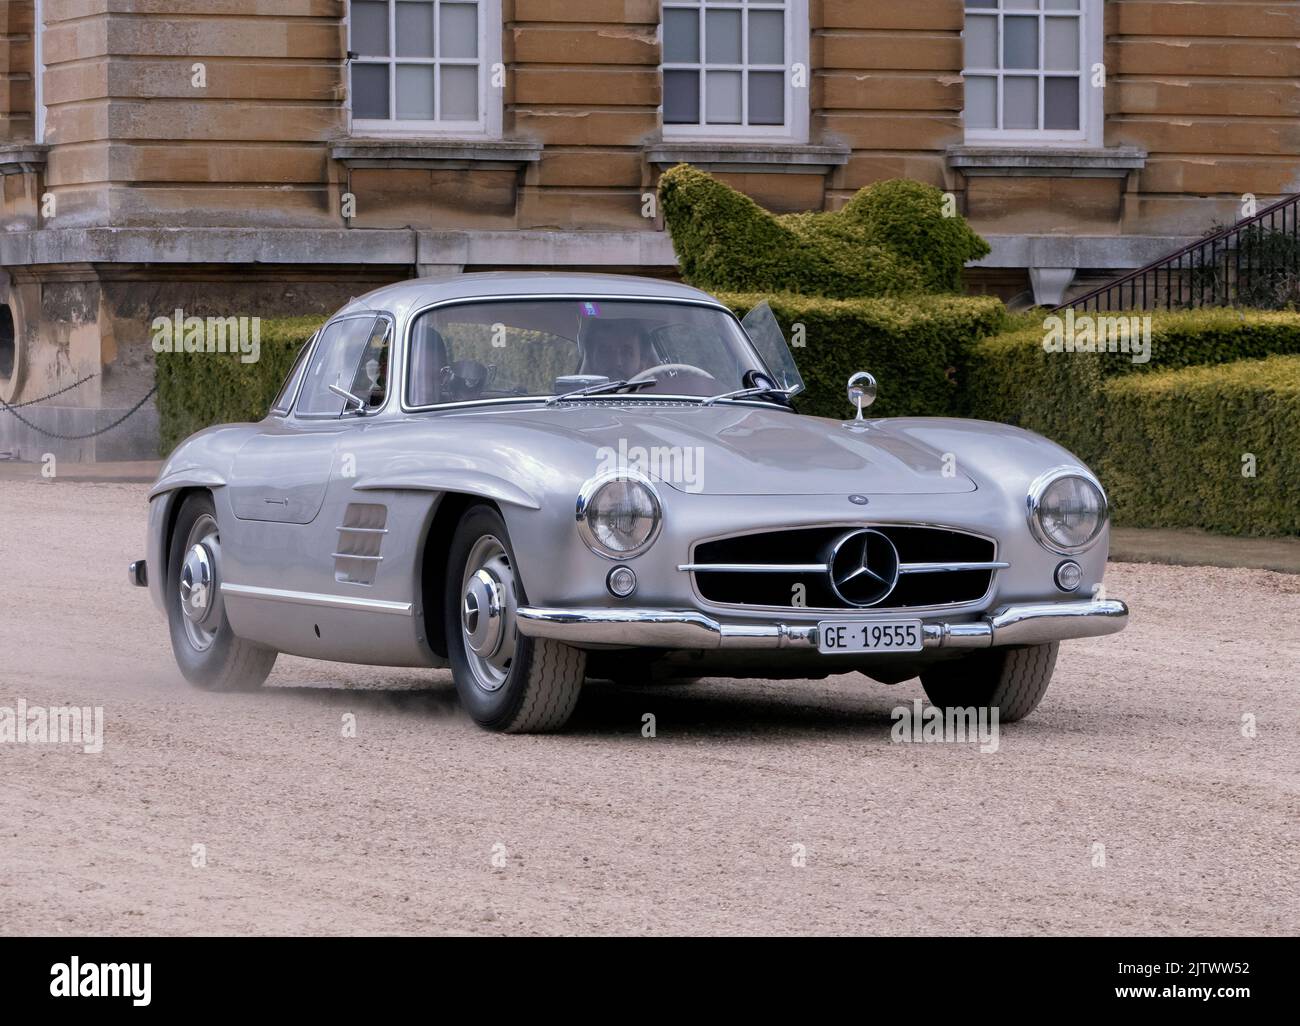 Mercedes-Benz 300SL Gullwing at Salon Prive Concours at Blenheim Palace Oxfordshire UK Stock Photo